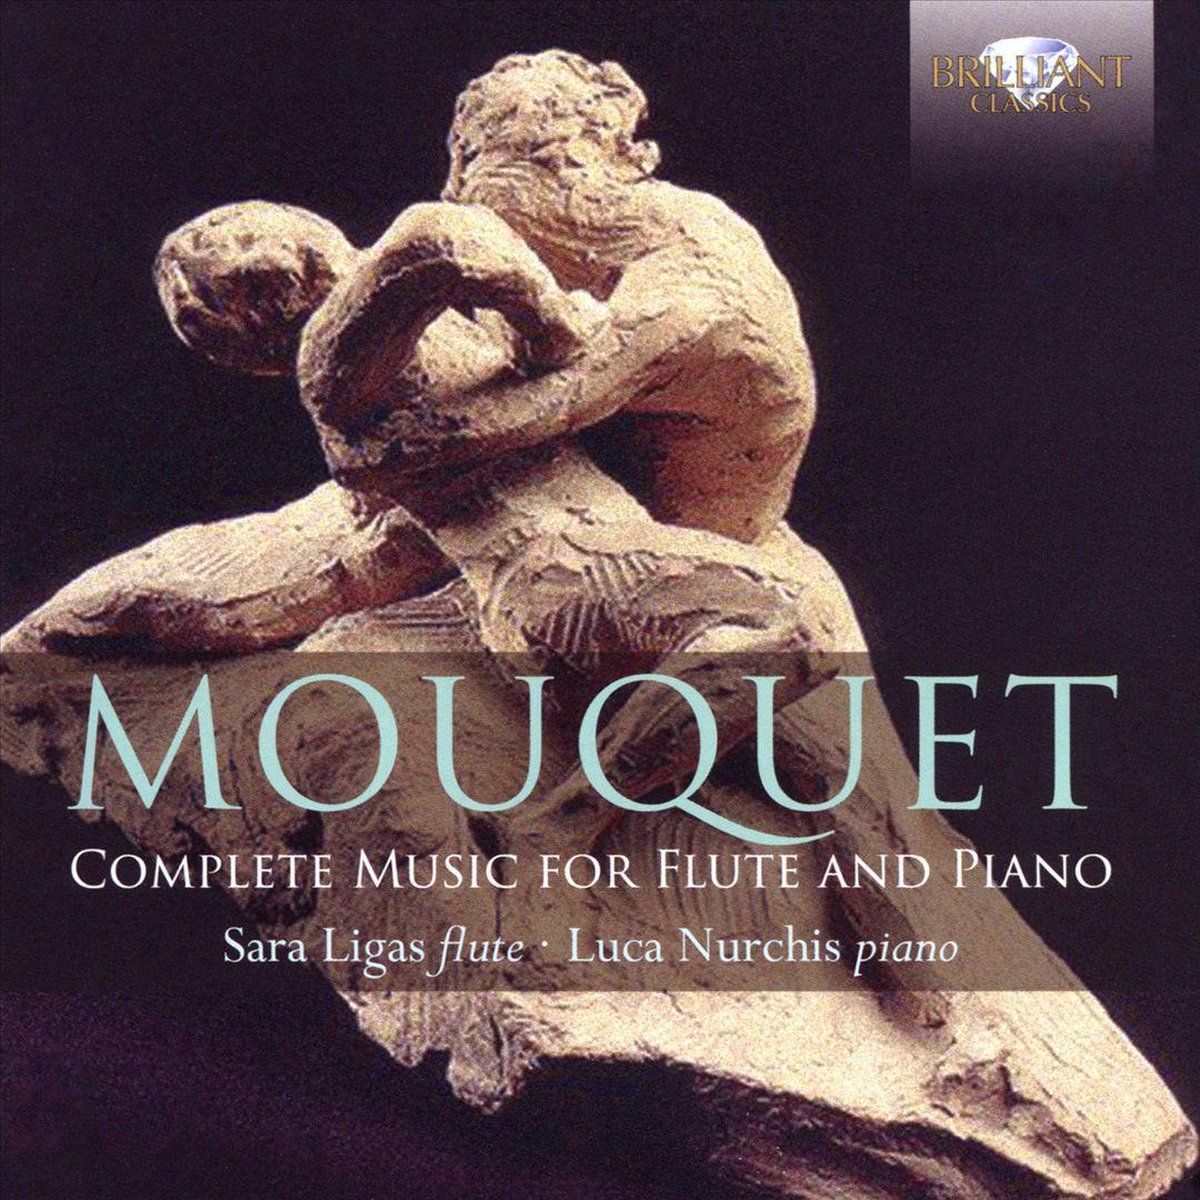 Afbeelding van product Mouquet: Complete Music For Flute And Piano  - Sara Ligas